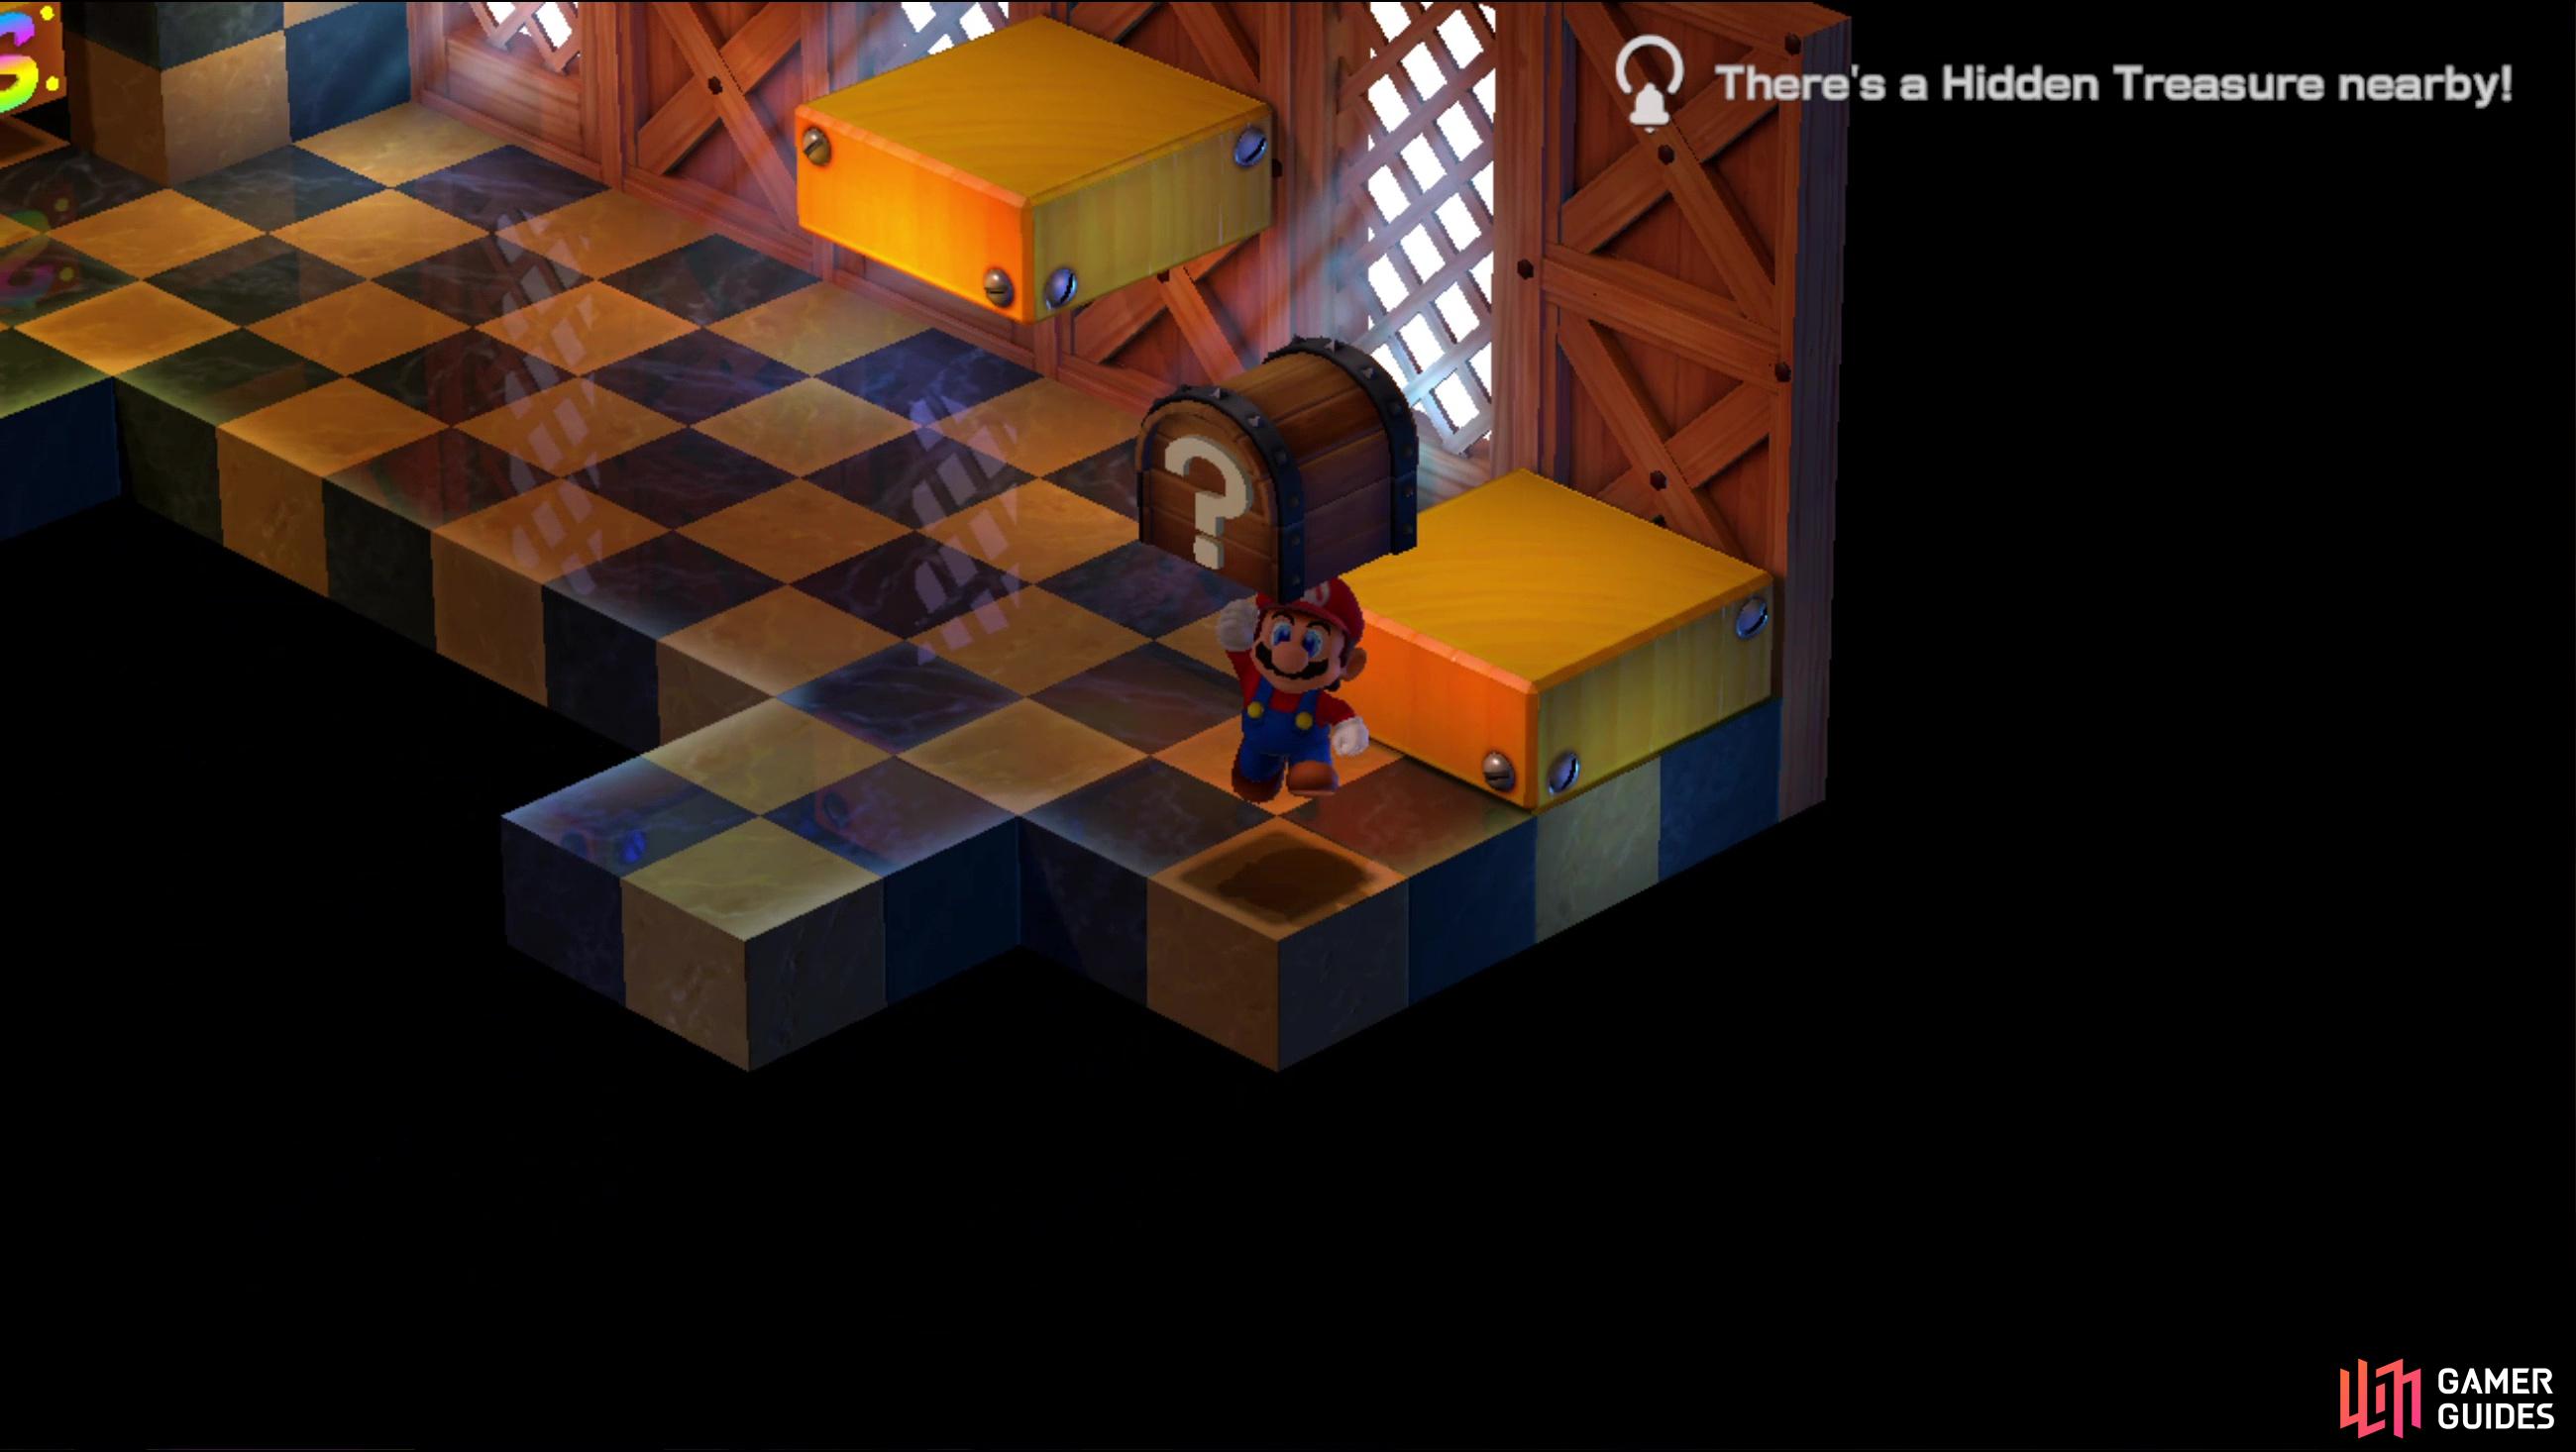 Finally, jump in the southern corner of the room to score the final hidden treasure in this area to score a Mushroom.